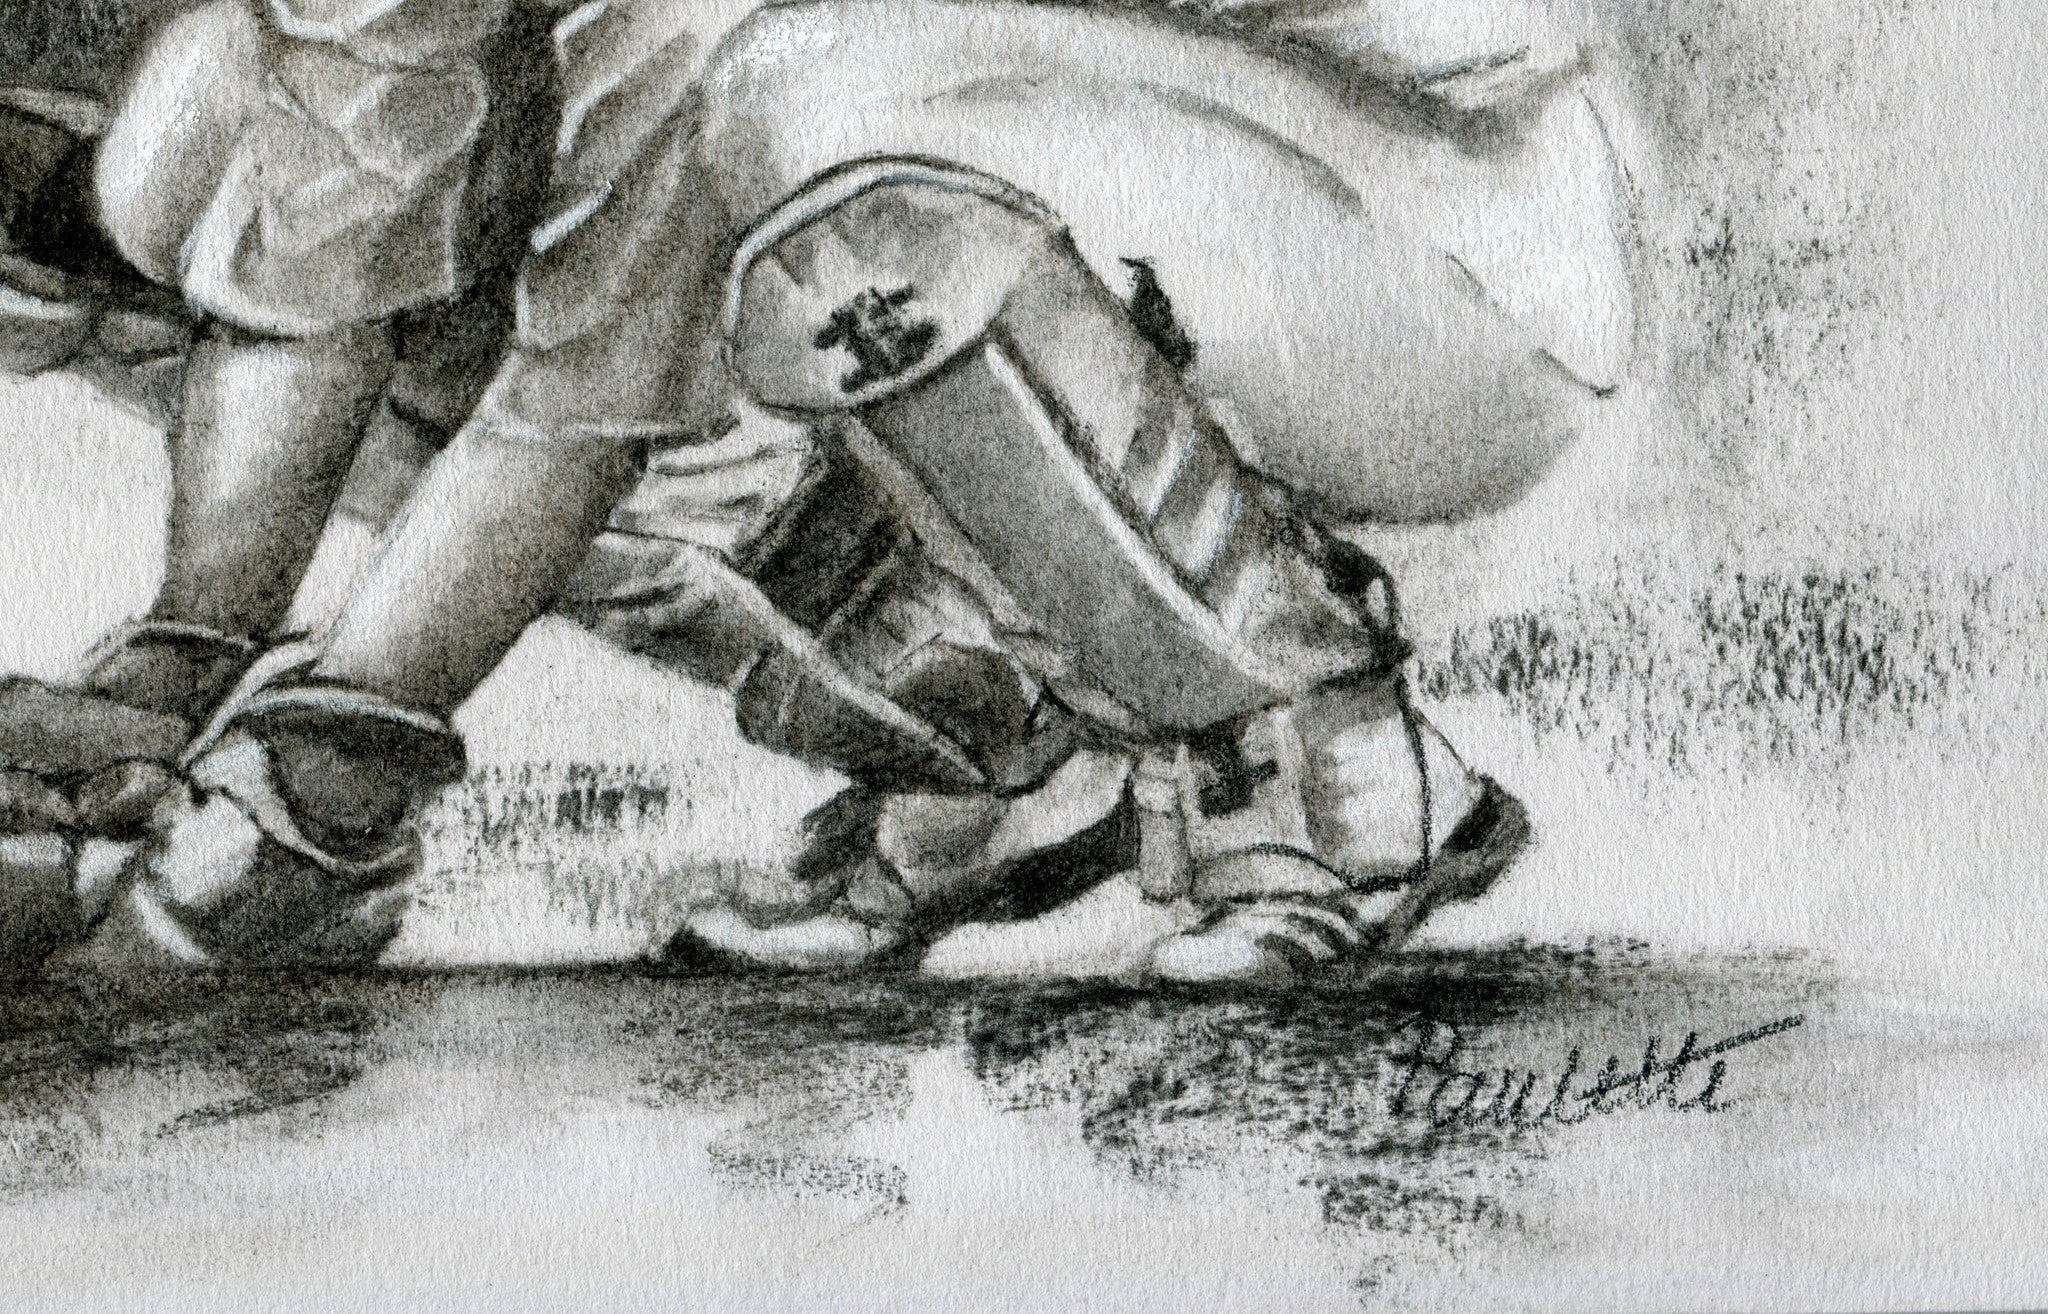 close up wicket keeper drawing standing up to the stumps drawn in charcoal with a green cap